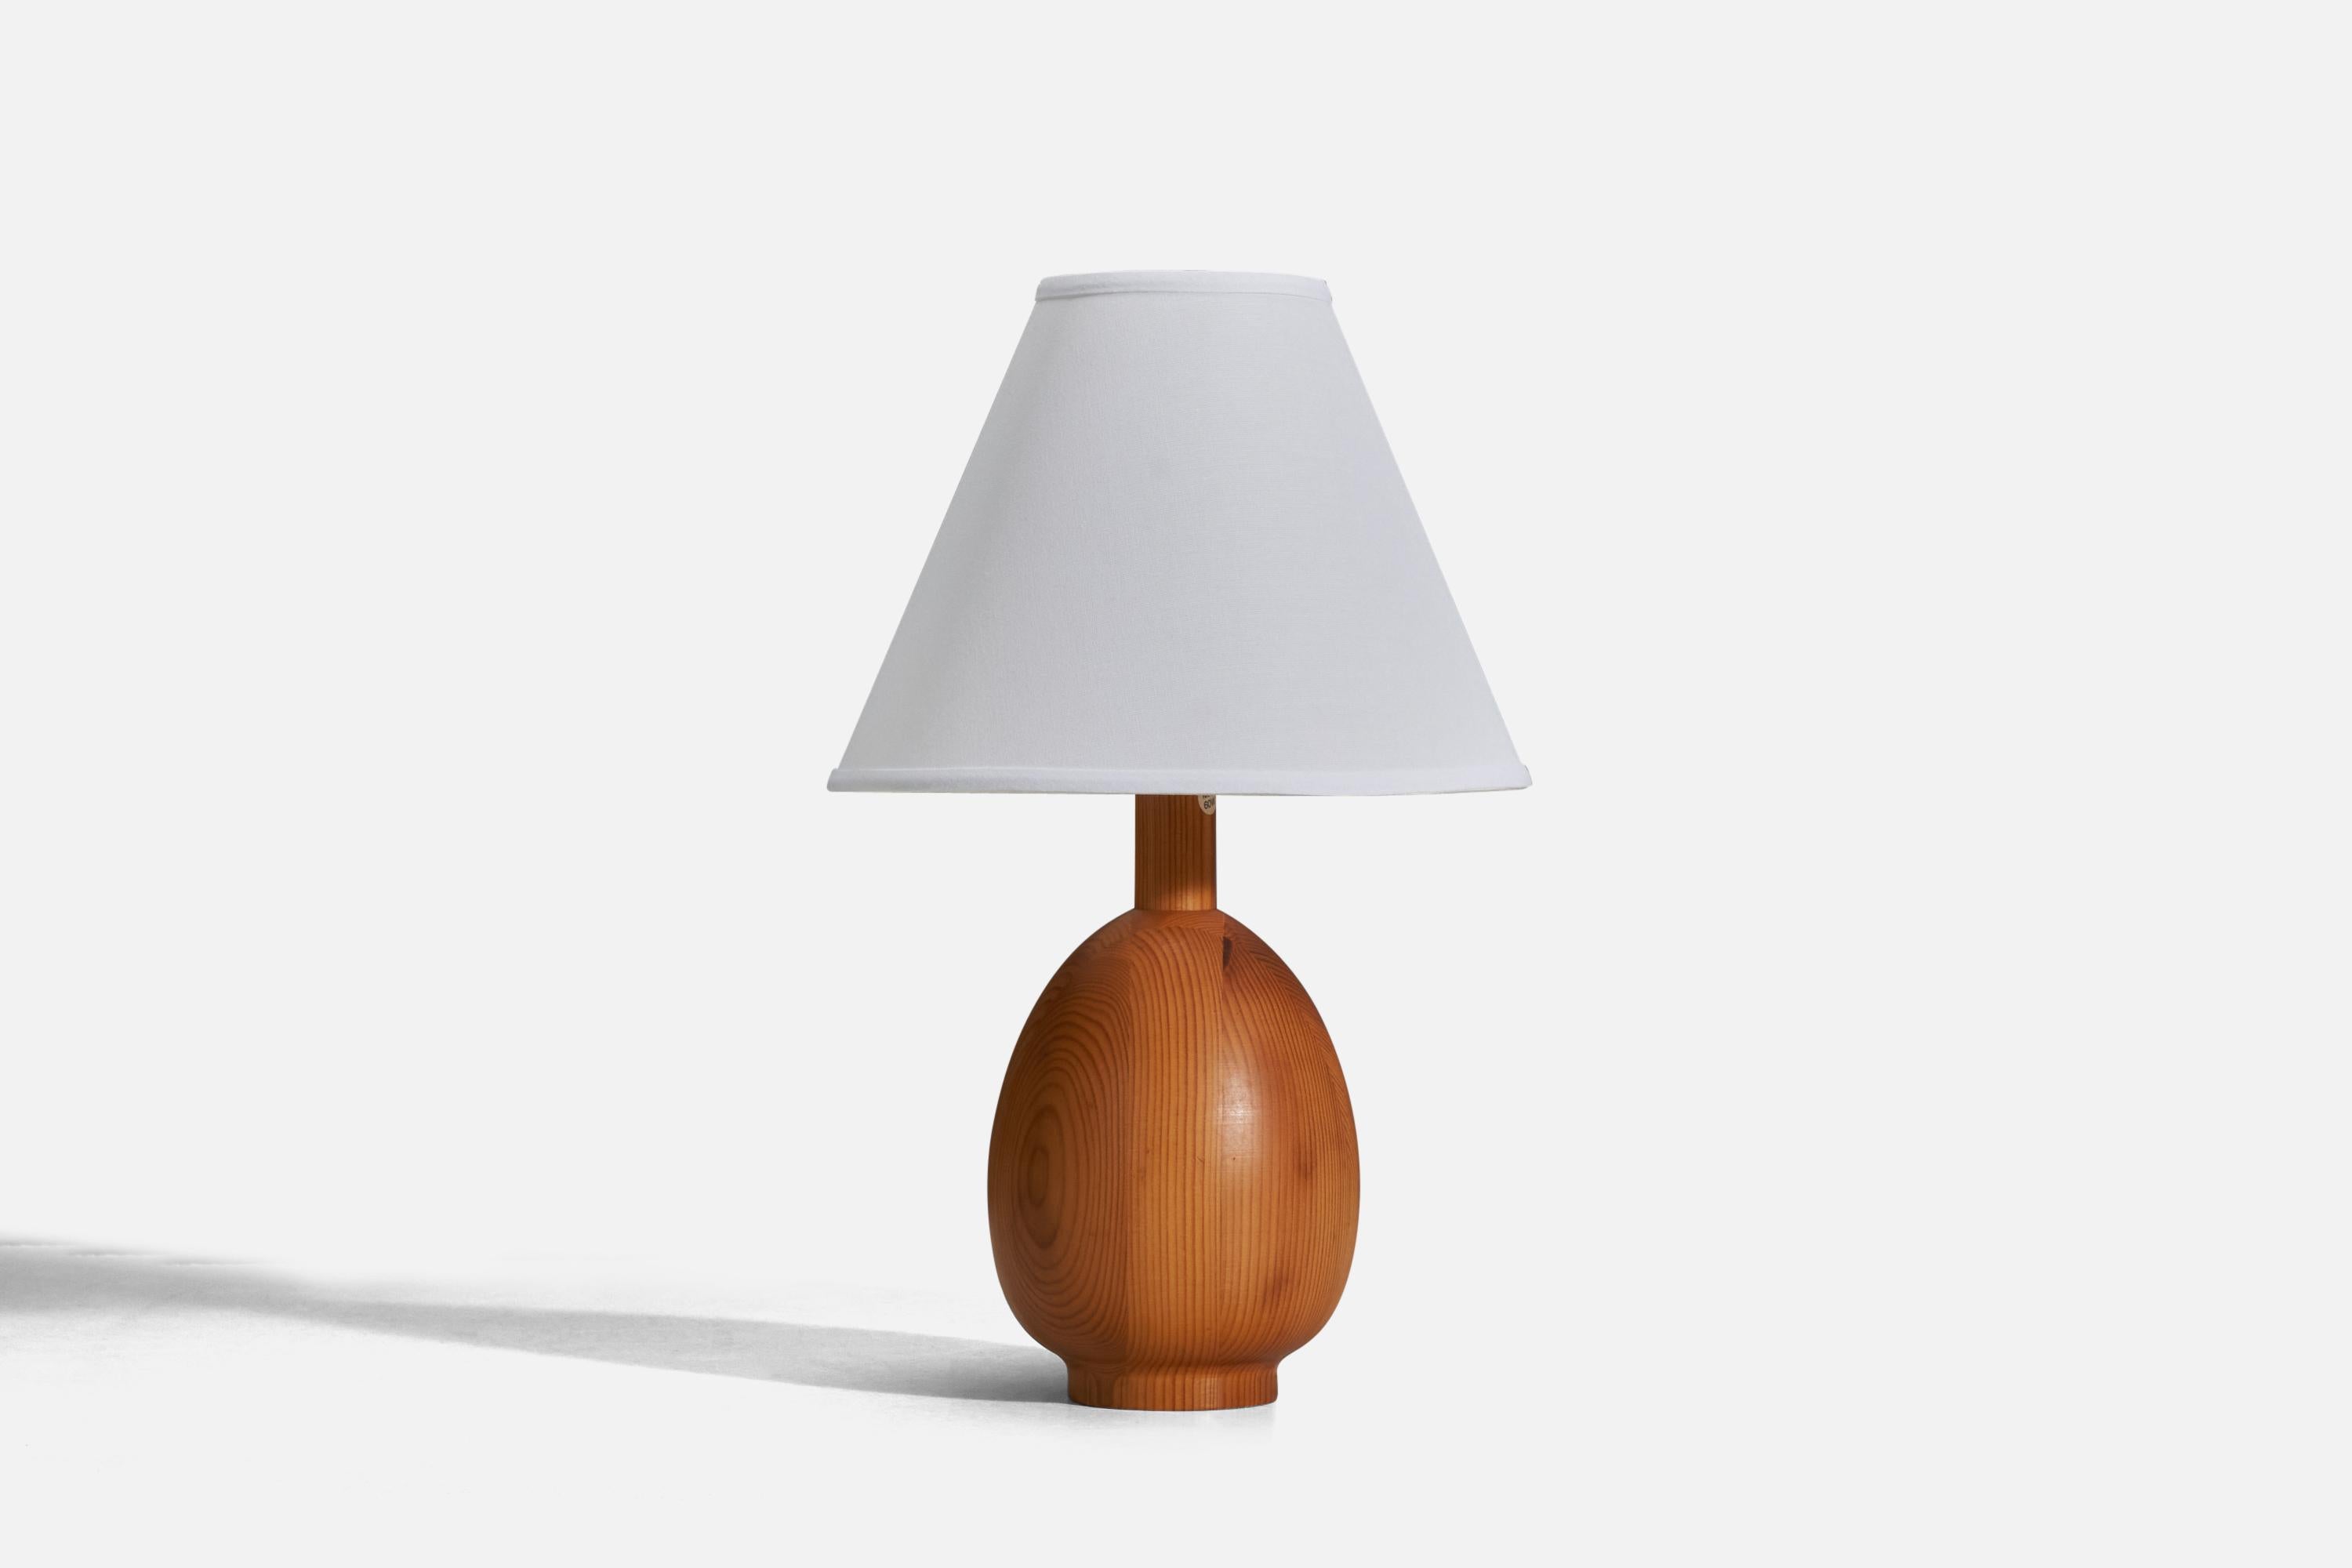 A pine table lamp designed and produced in Sweden, 1970s.

Sold without Lampshade
Dimensions of Lamp (inches) : 11.25 x 5.43 x 5.43 (Height x Width x Depth)
Dimensions of Lampshade (inches) : 4 x 10 x 8 (Top Diameter x Bottom Diameter x